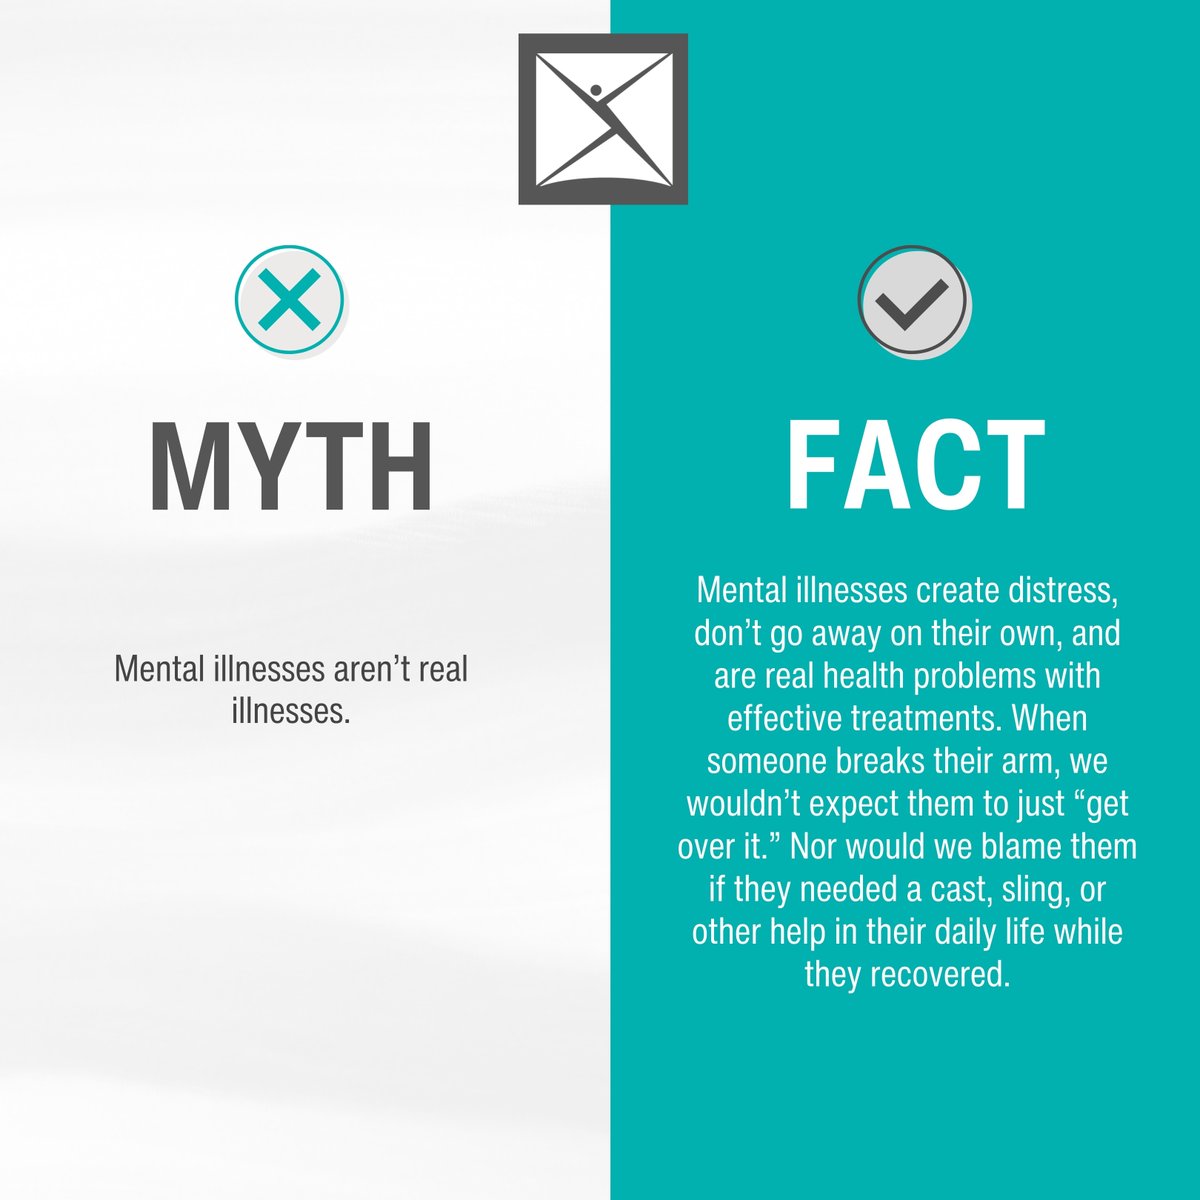 Mental illnesses are REAL and deserve our understanding and support. Just like a broken arm, they create distress and need proper care. It's time to break the stigma and embrace effective treatments. 

#CMHAEdmonton #mentalhealth #mentalhealthfacts #mentalhealthmyths